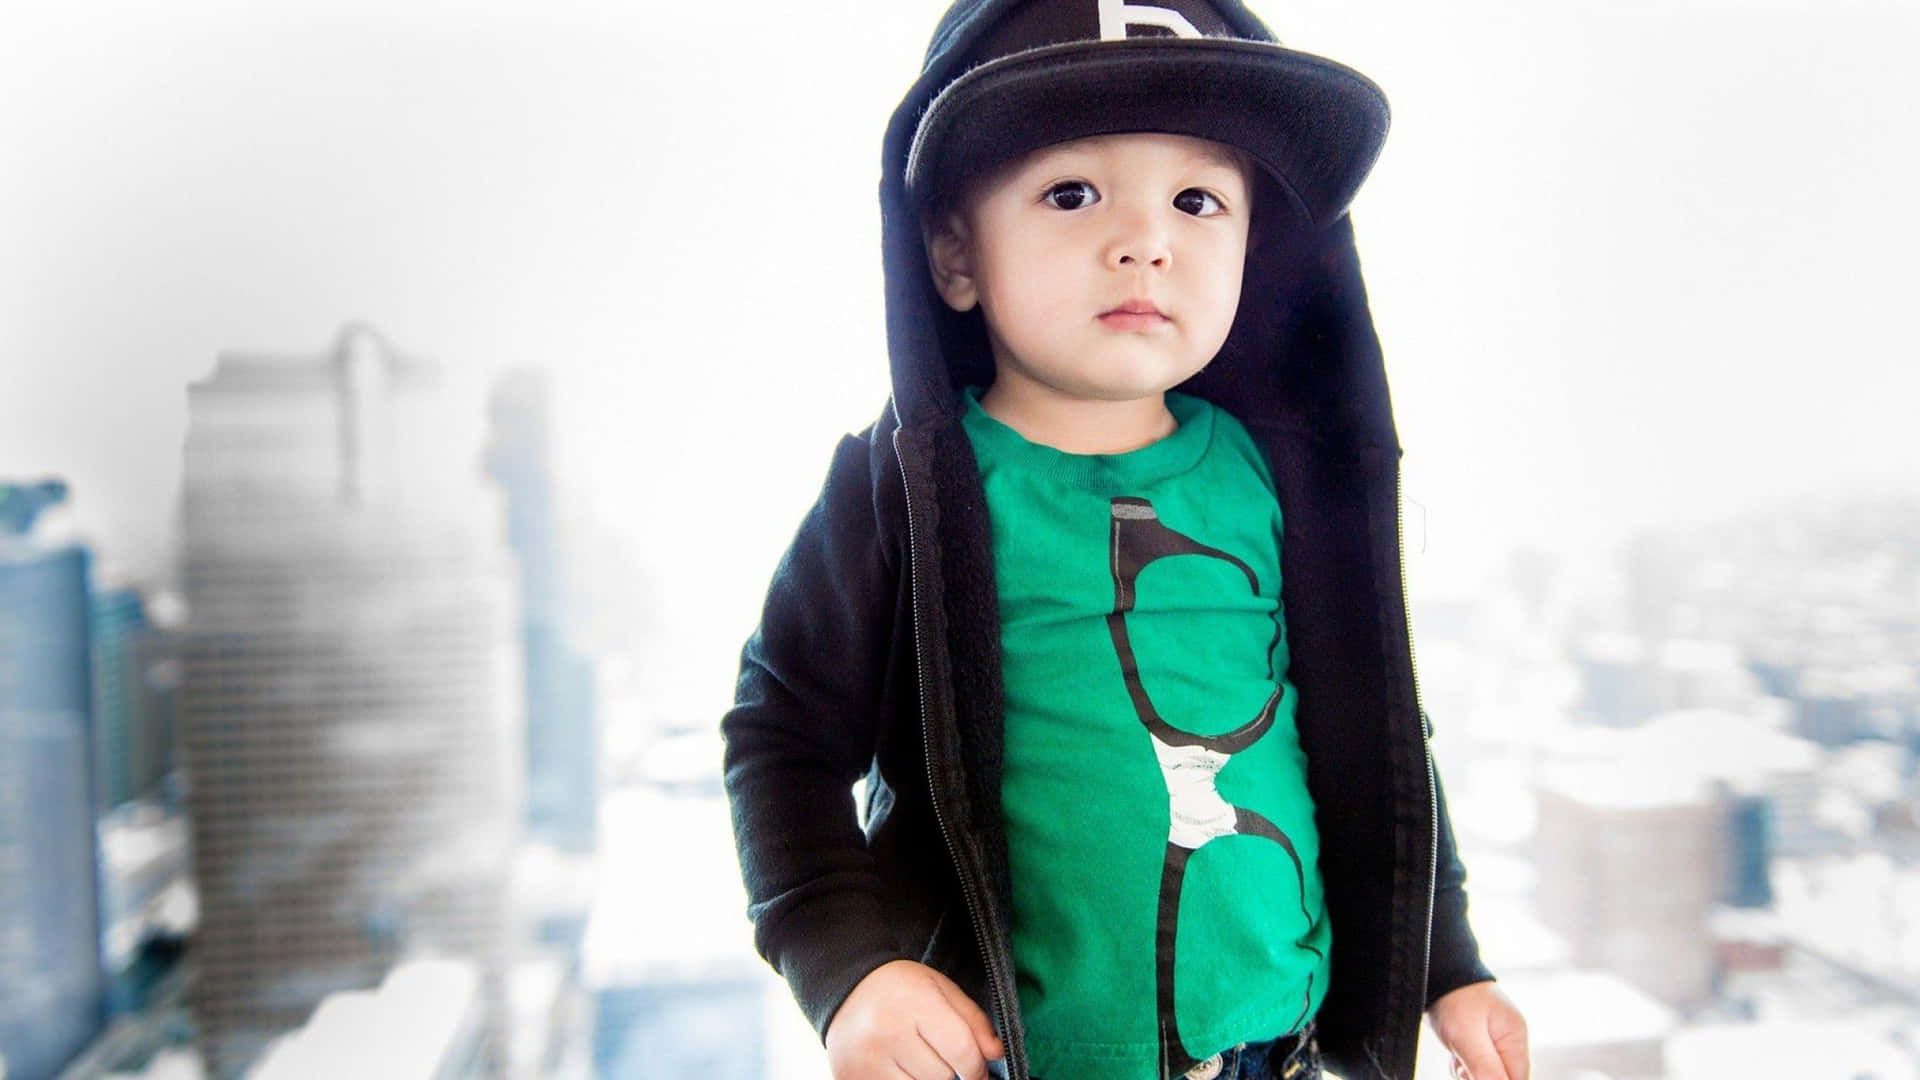 Download Cute Stylish Boy With Hoodie And Cap Wallpaper 